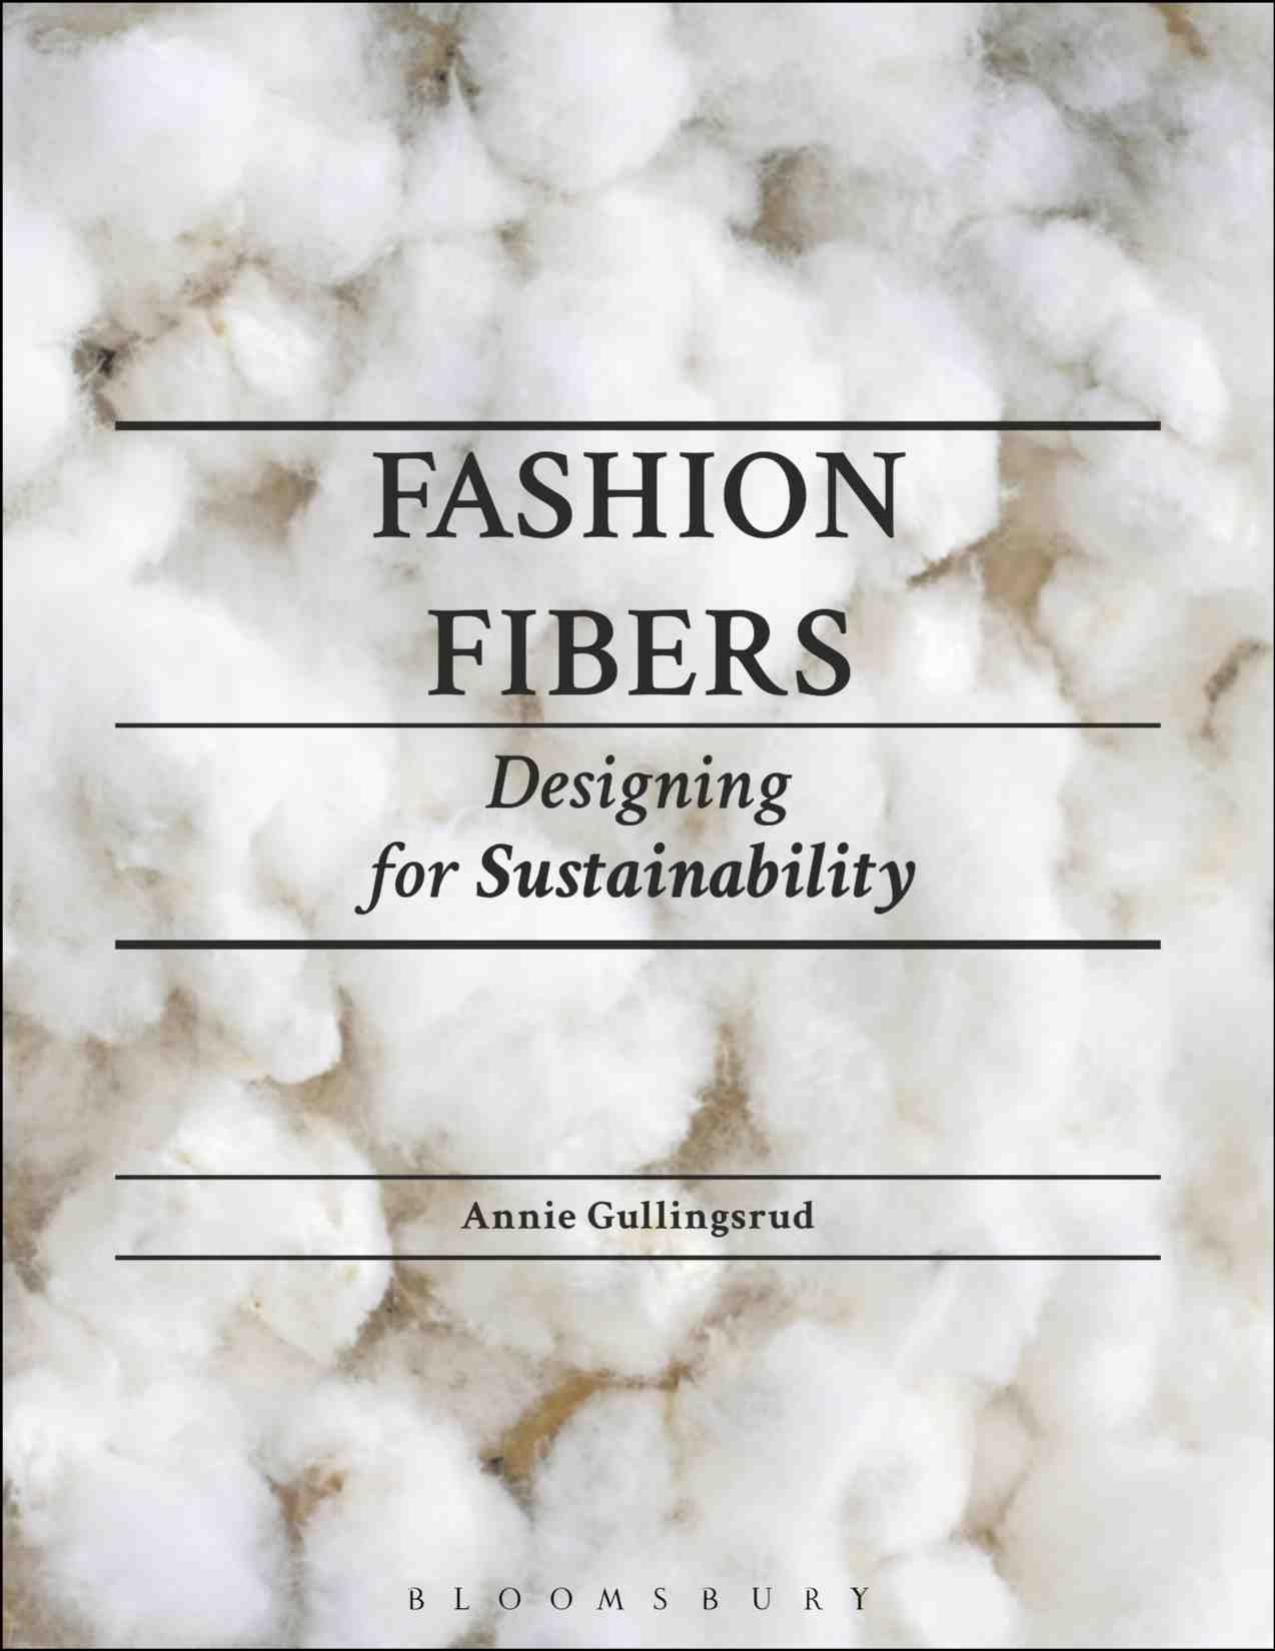 Fashion Fibers Designing for Sustainability by Annie Gullingsrud